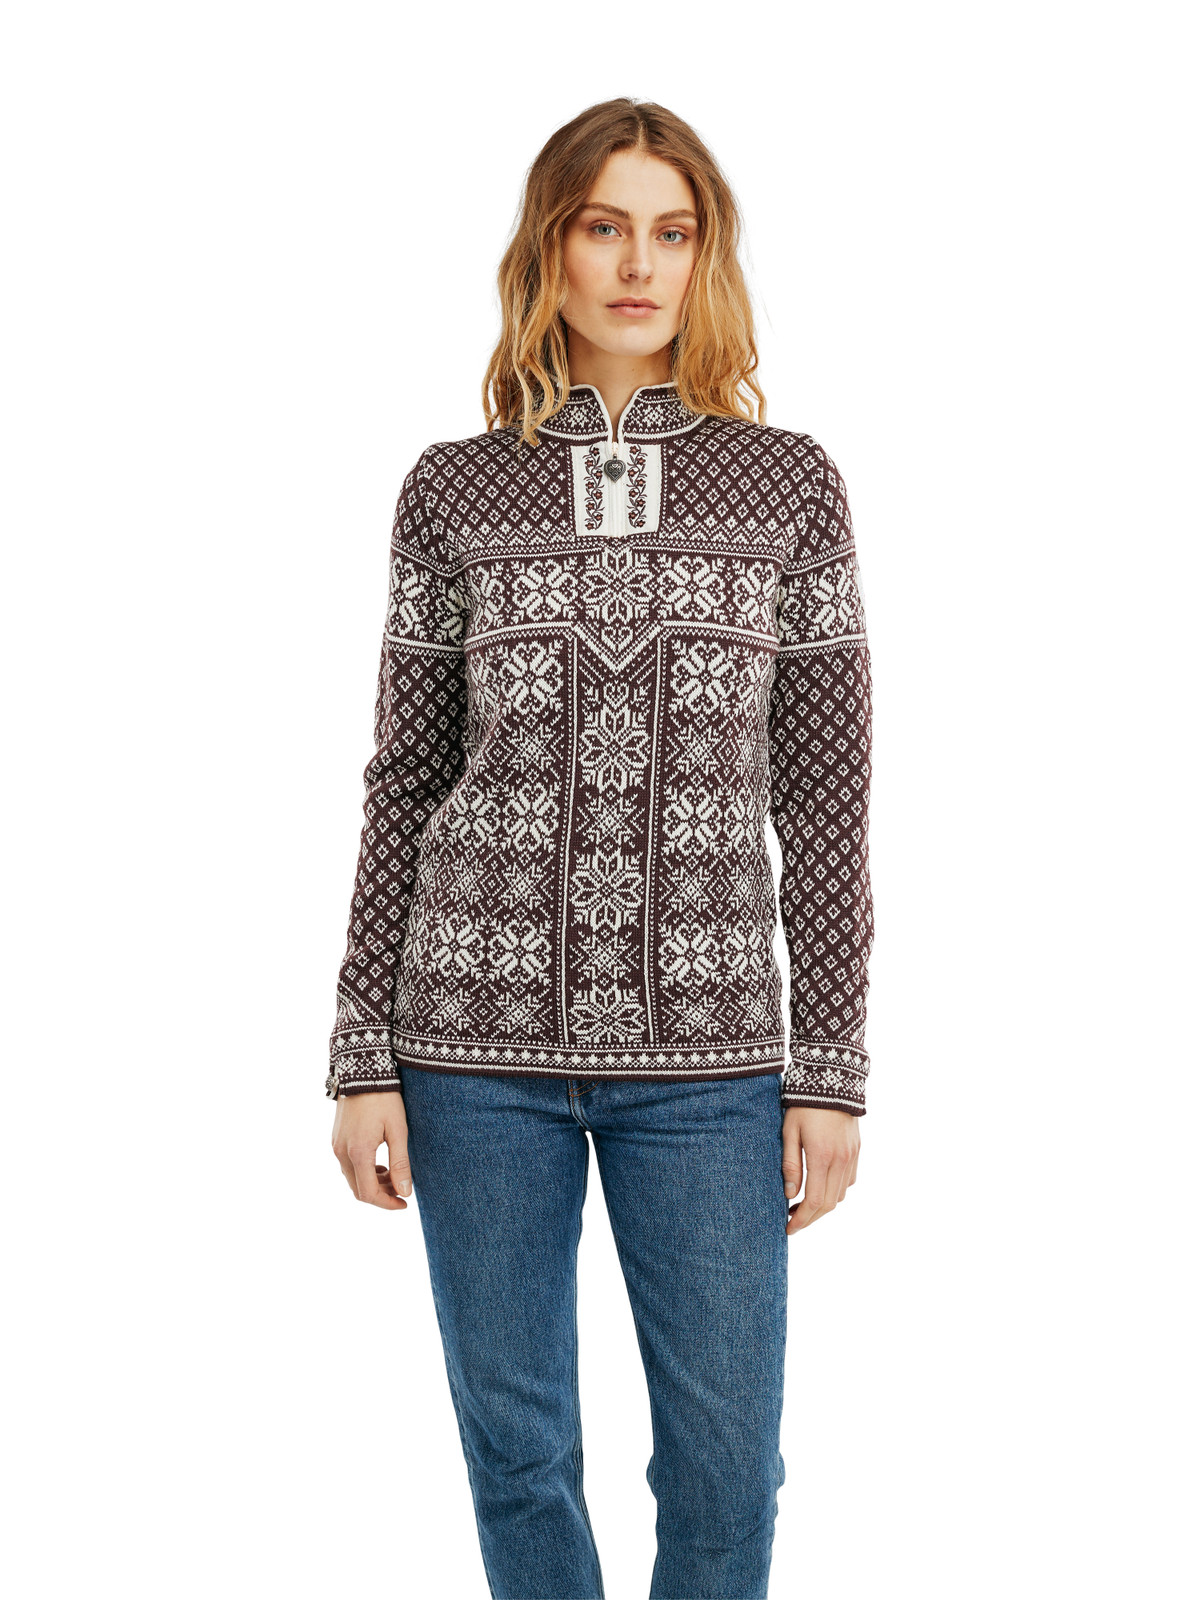 Dale of Norway Peace Women's Sweater, Aubergine/Off White, 13312Q00